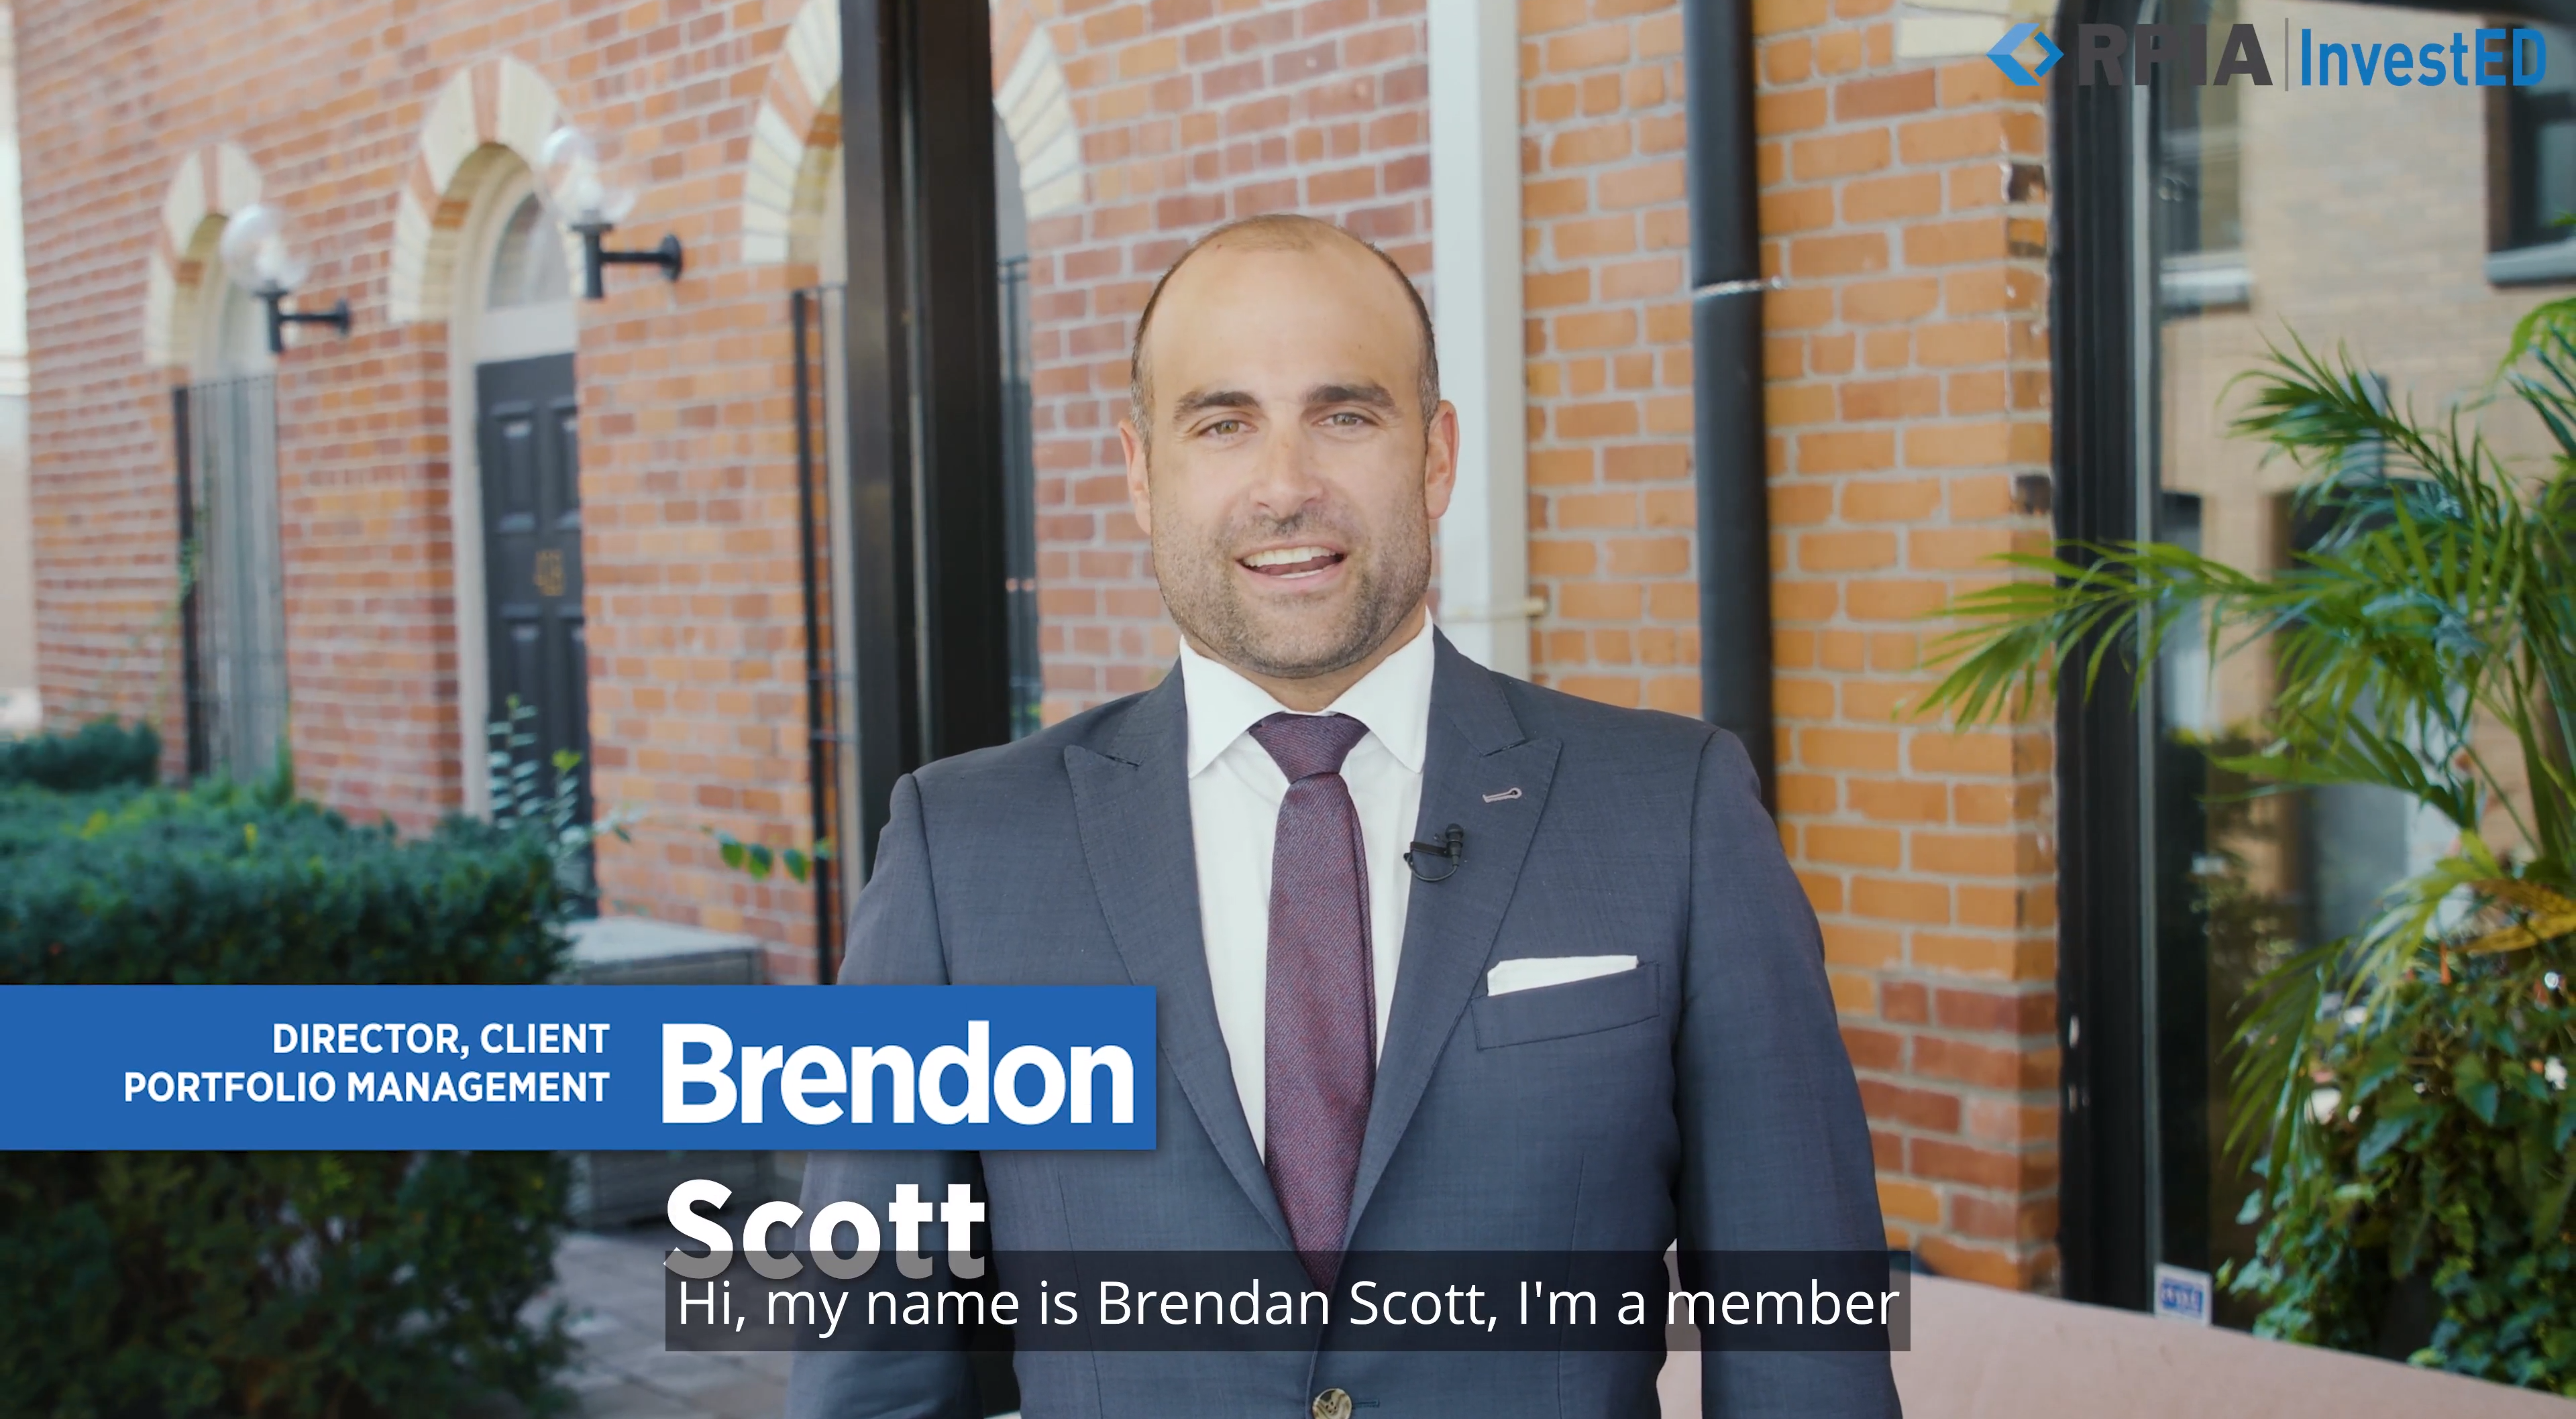 InvestED video featuring Brendon Scott